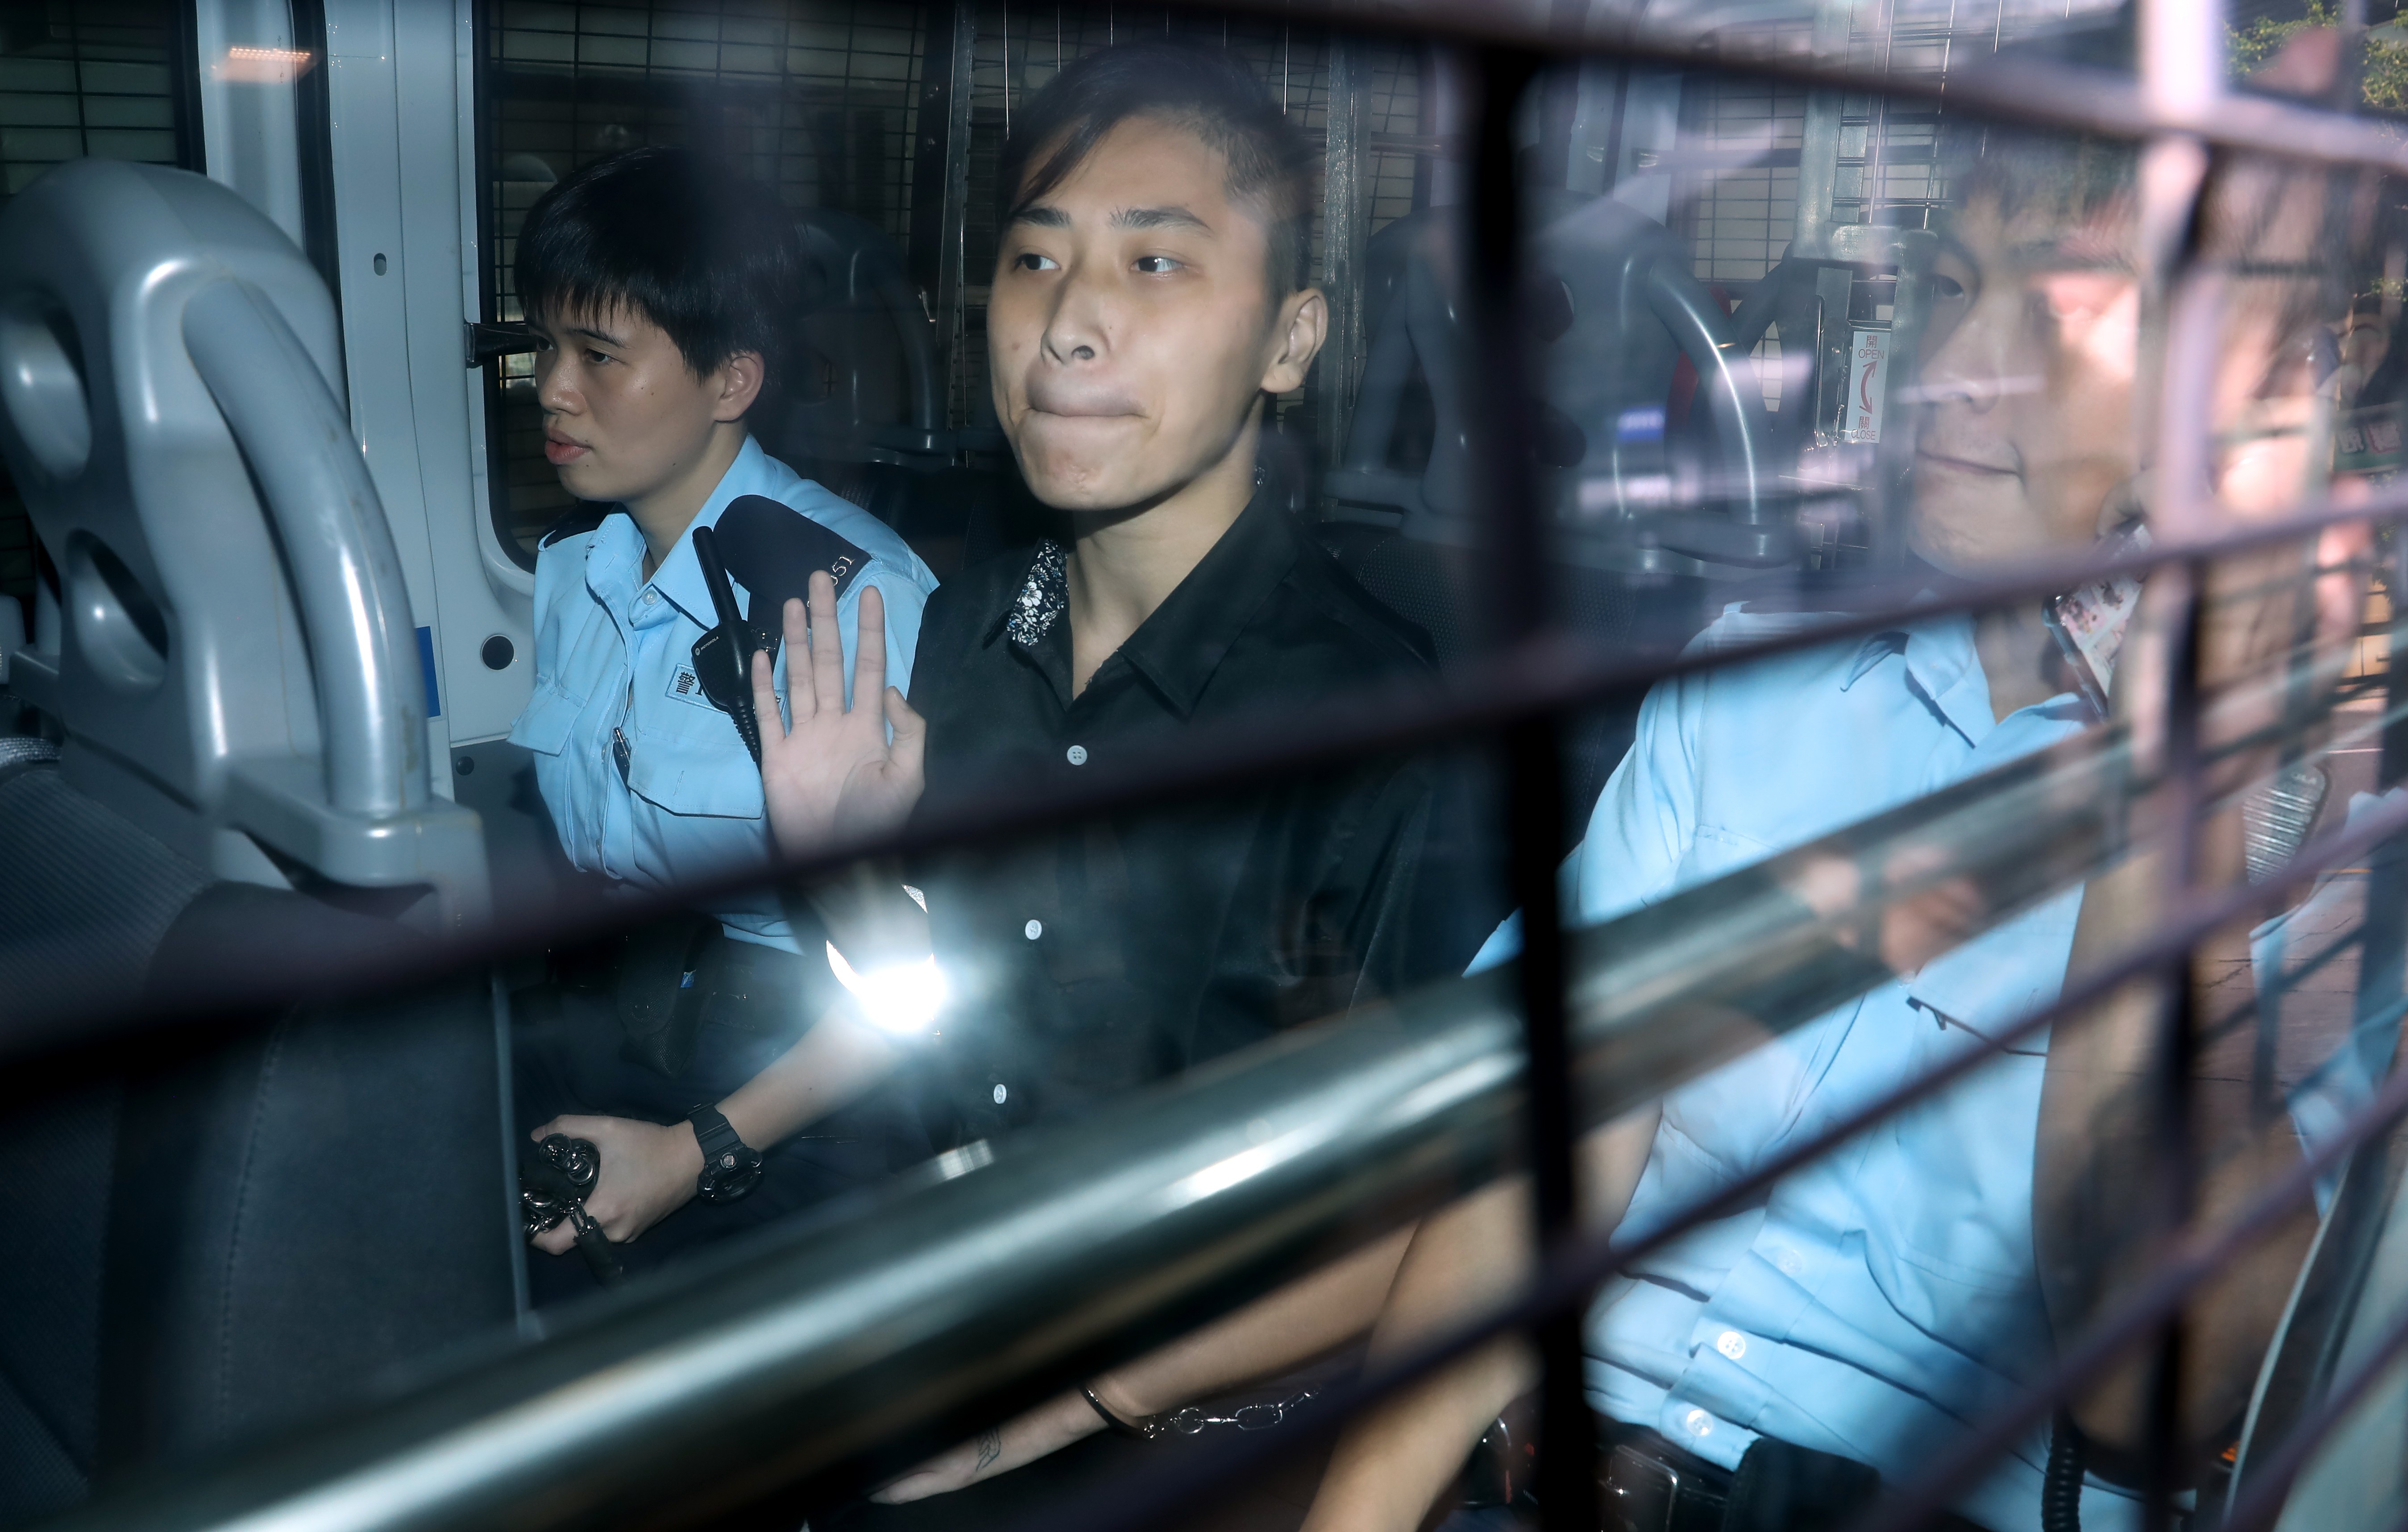 Amy Pat appears at the Eastern Court in police custody on Tuesday. Photo: K. Y. Cheng